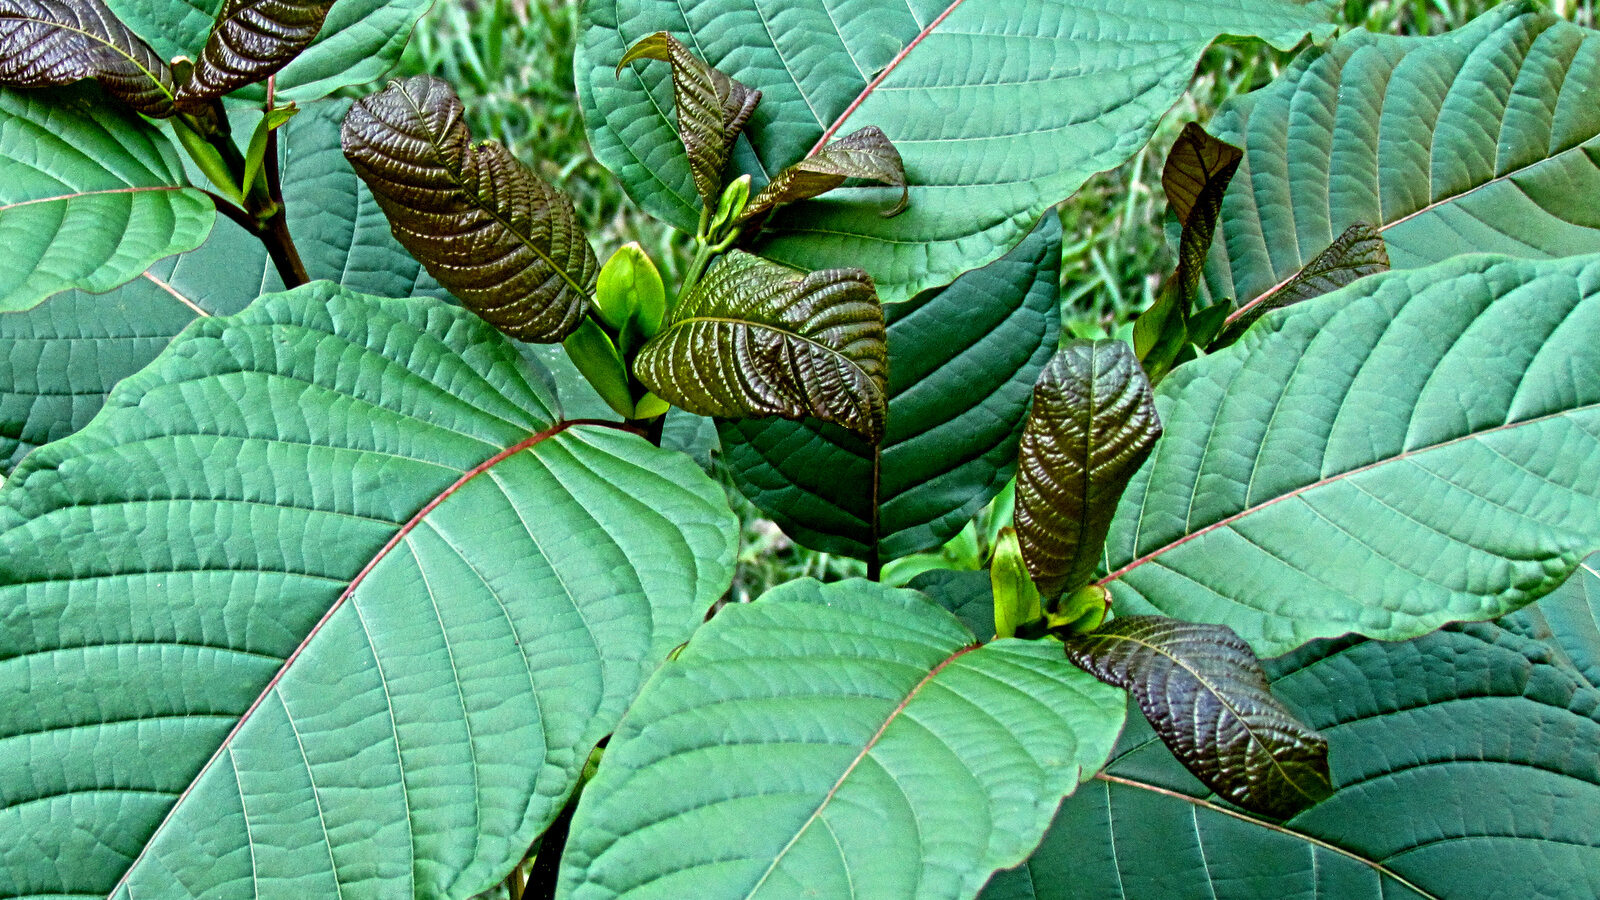 The leaves of a Mitragyna speciosa Korth tree. More commonly known as kratom.